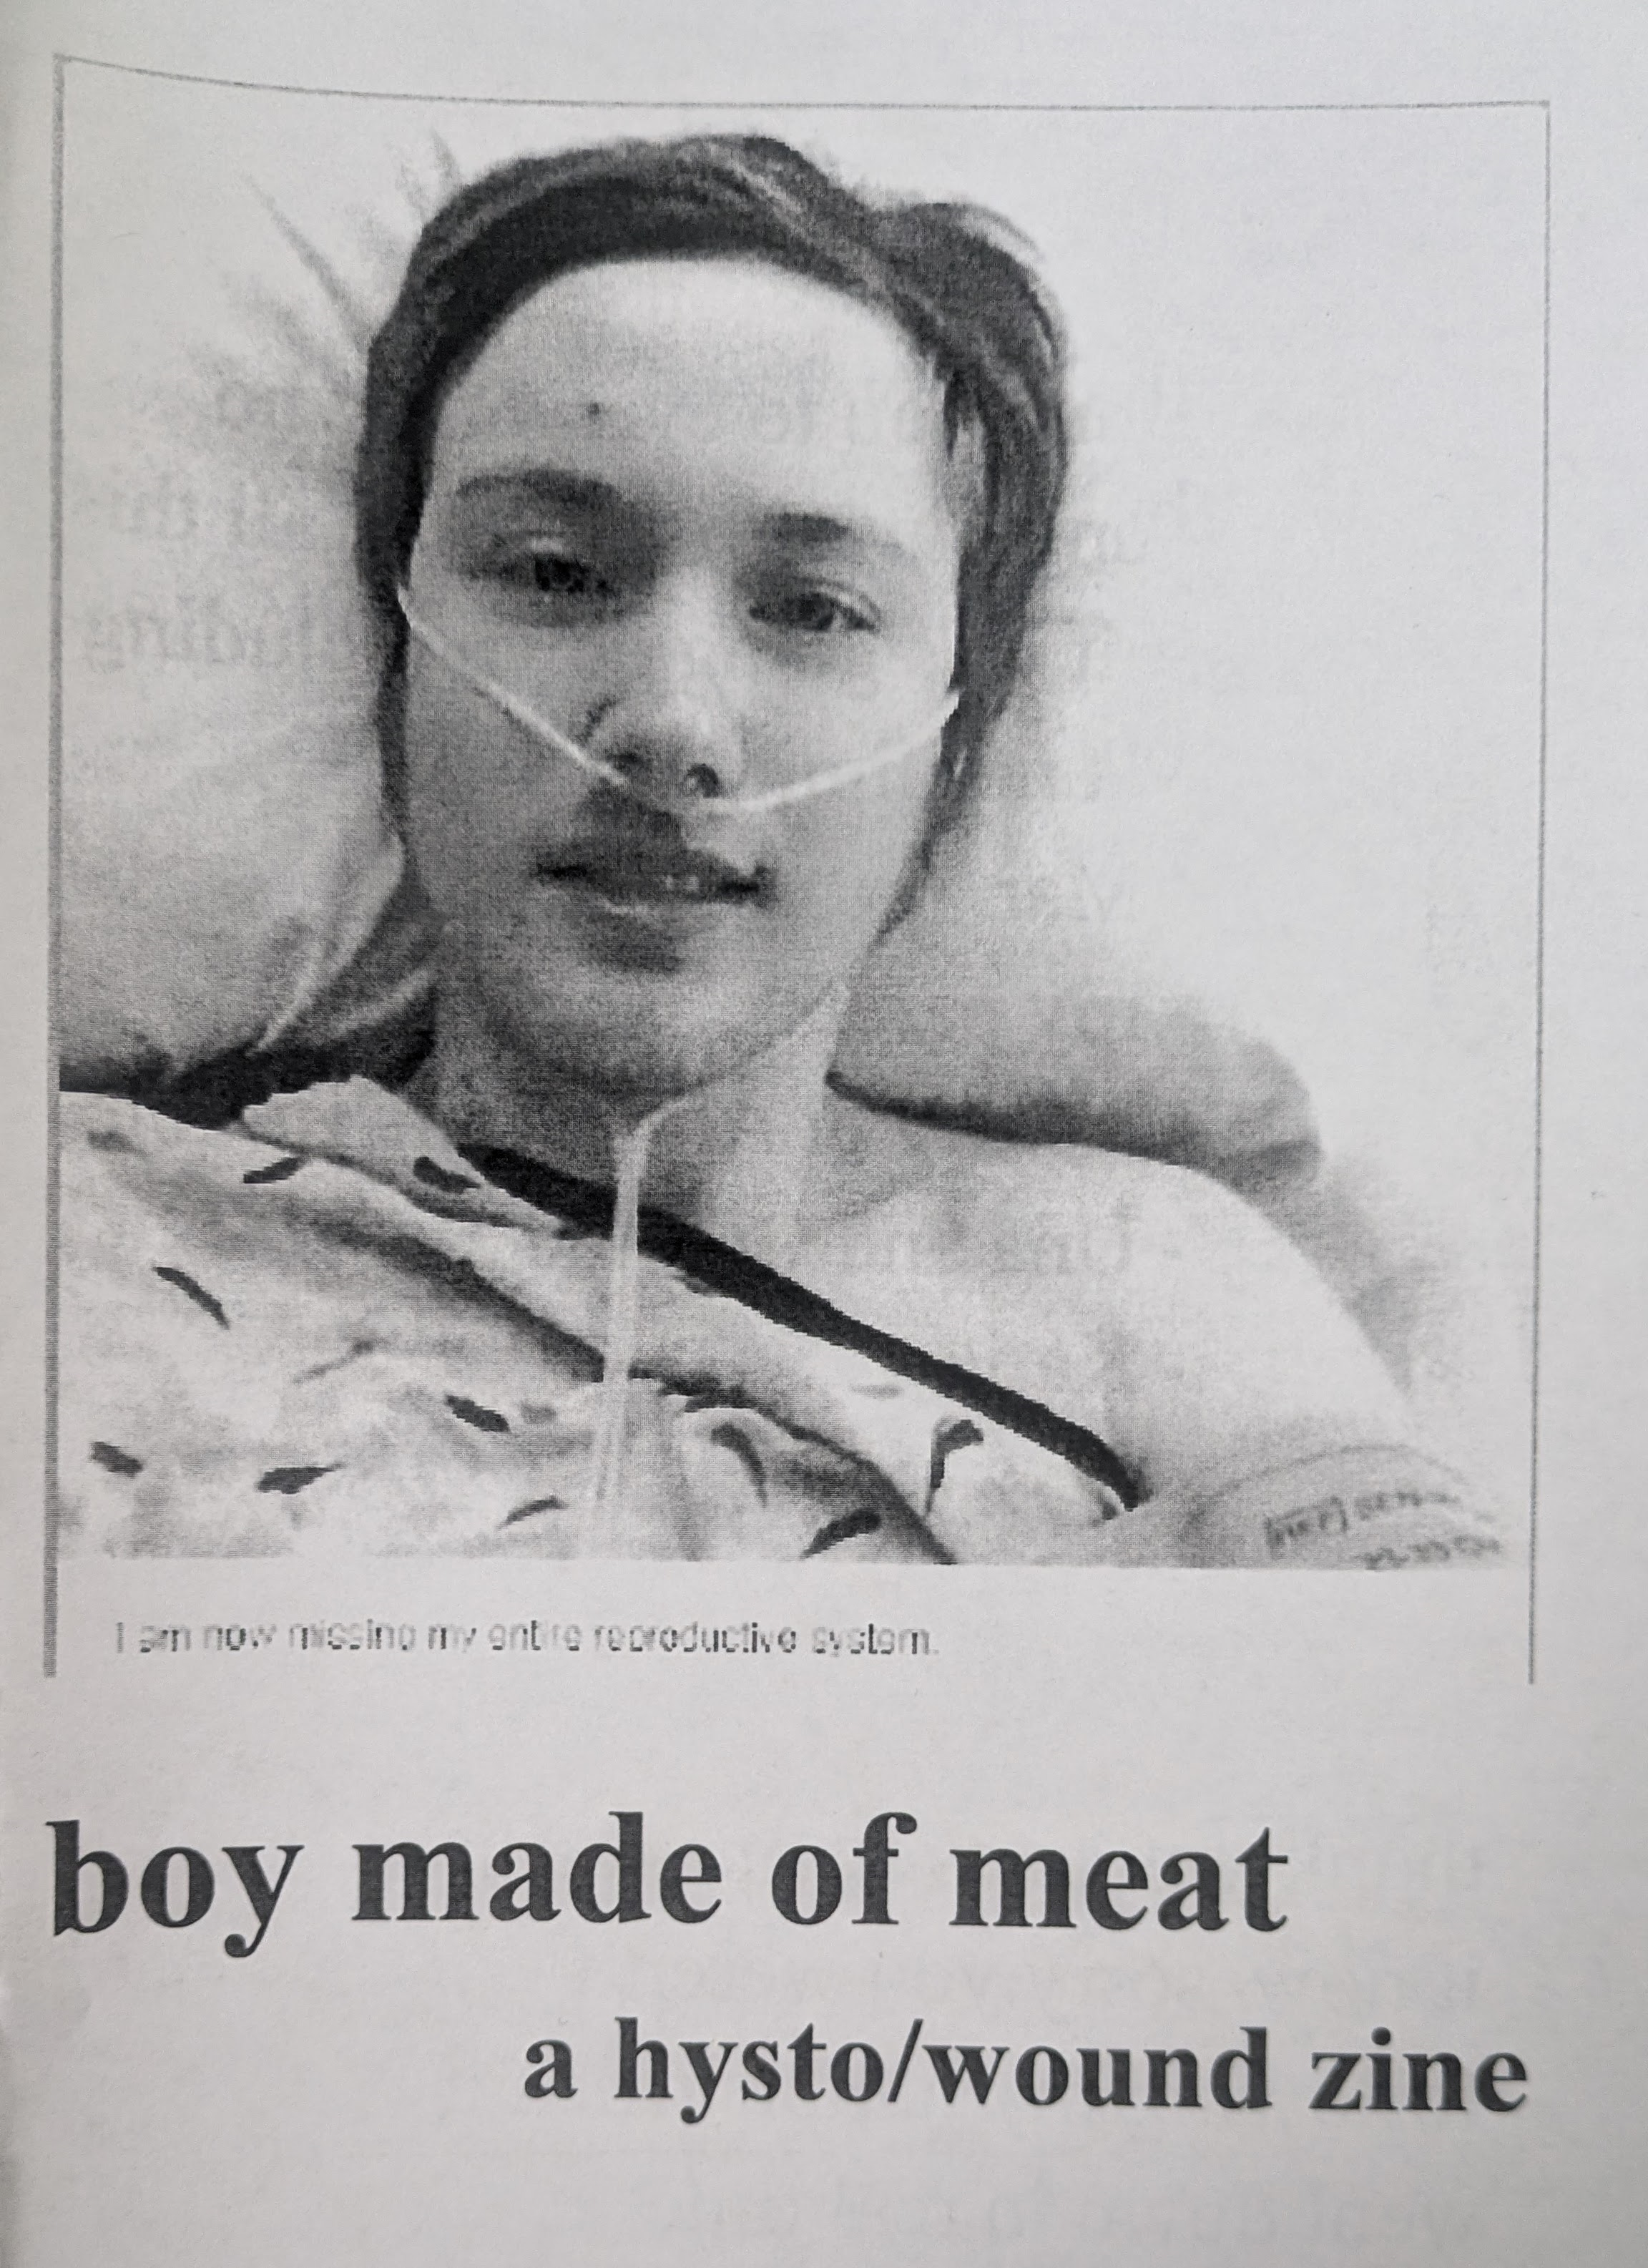 The cover of the zine “Boy Made of Meat.” A photo of the author in the hospital with a screenshot of a tumblr text post saying “I am now missing my entire reproductive syste.”